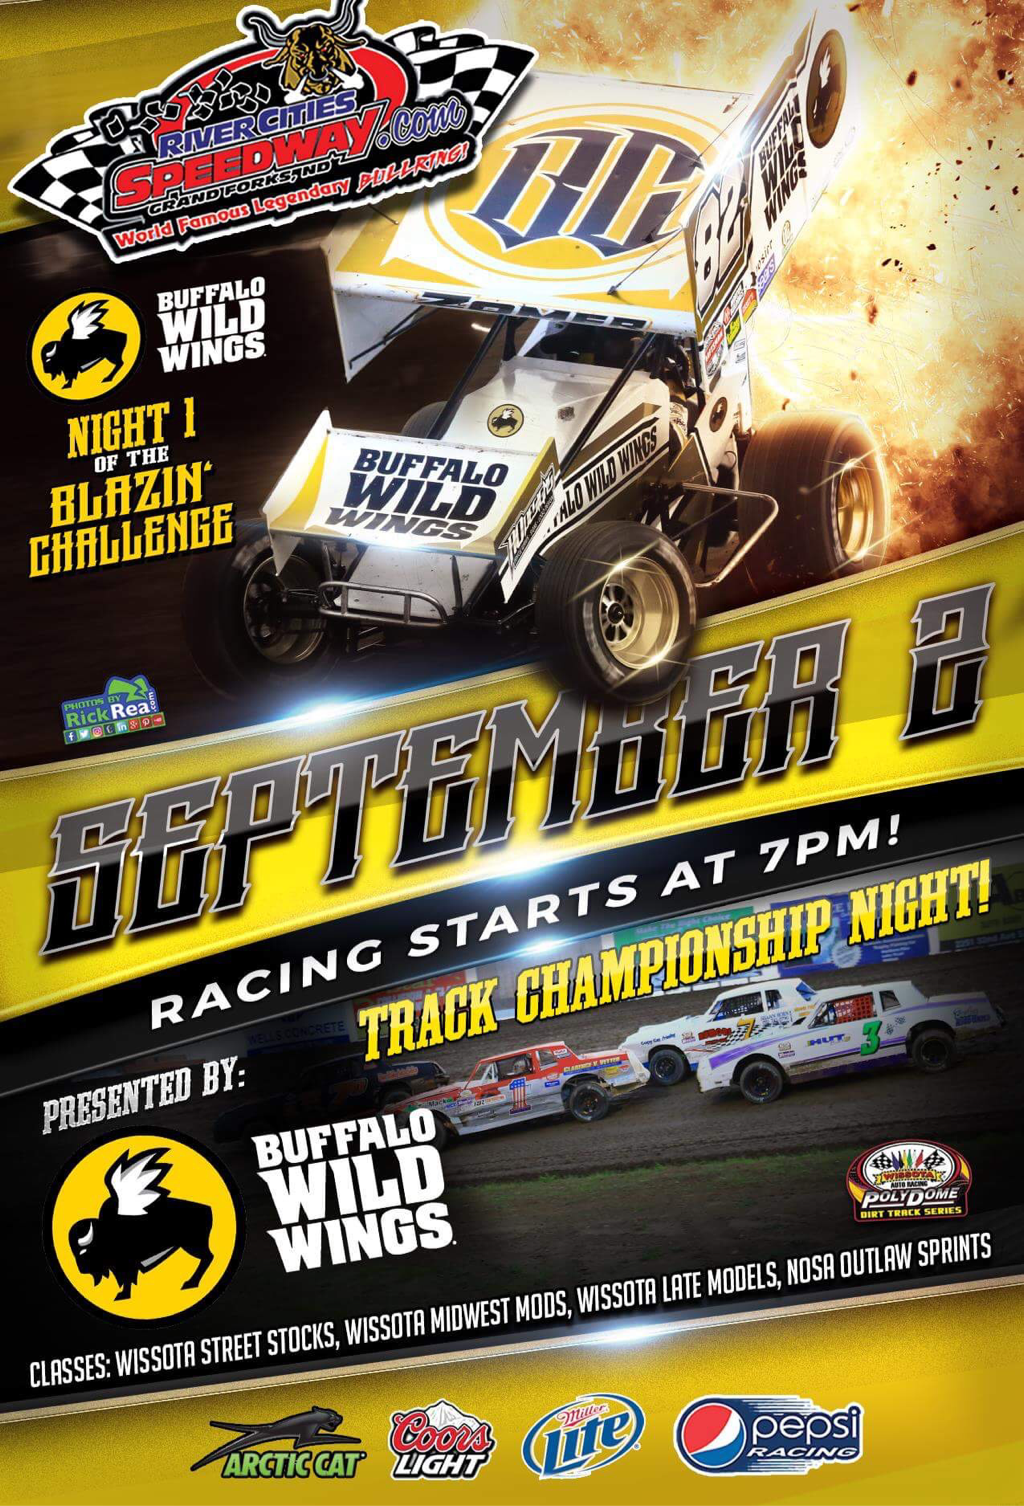 River Cities Speedway September 2nd 2016 Buffalo Wild Wings Night one of the Blazin' Outlaw Sprint Car Challenge and Track Championship Night 